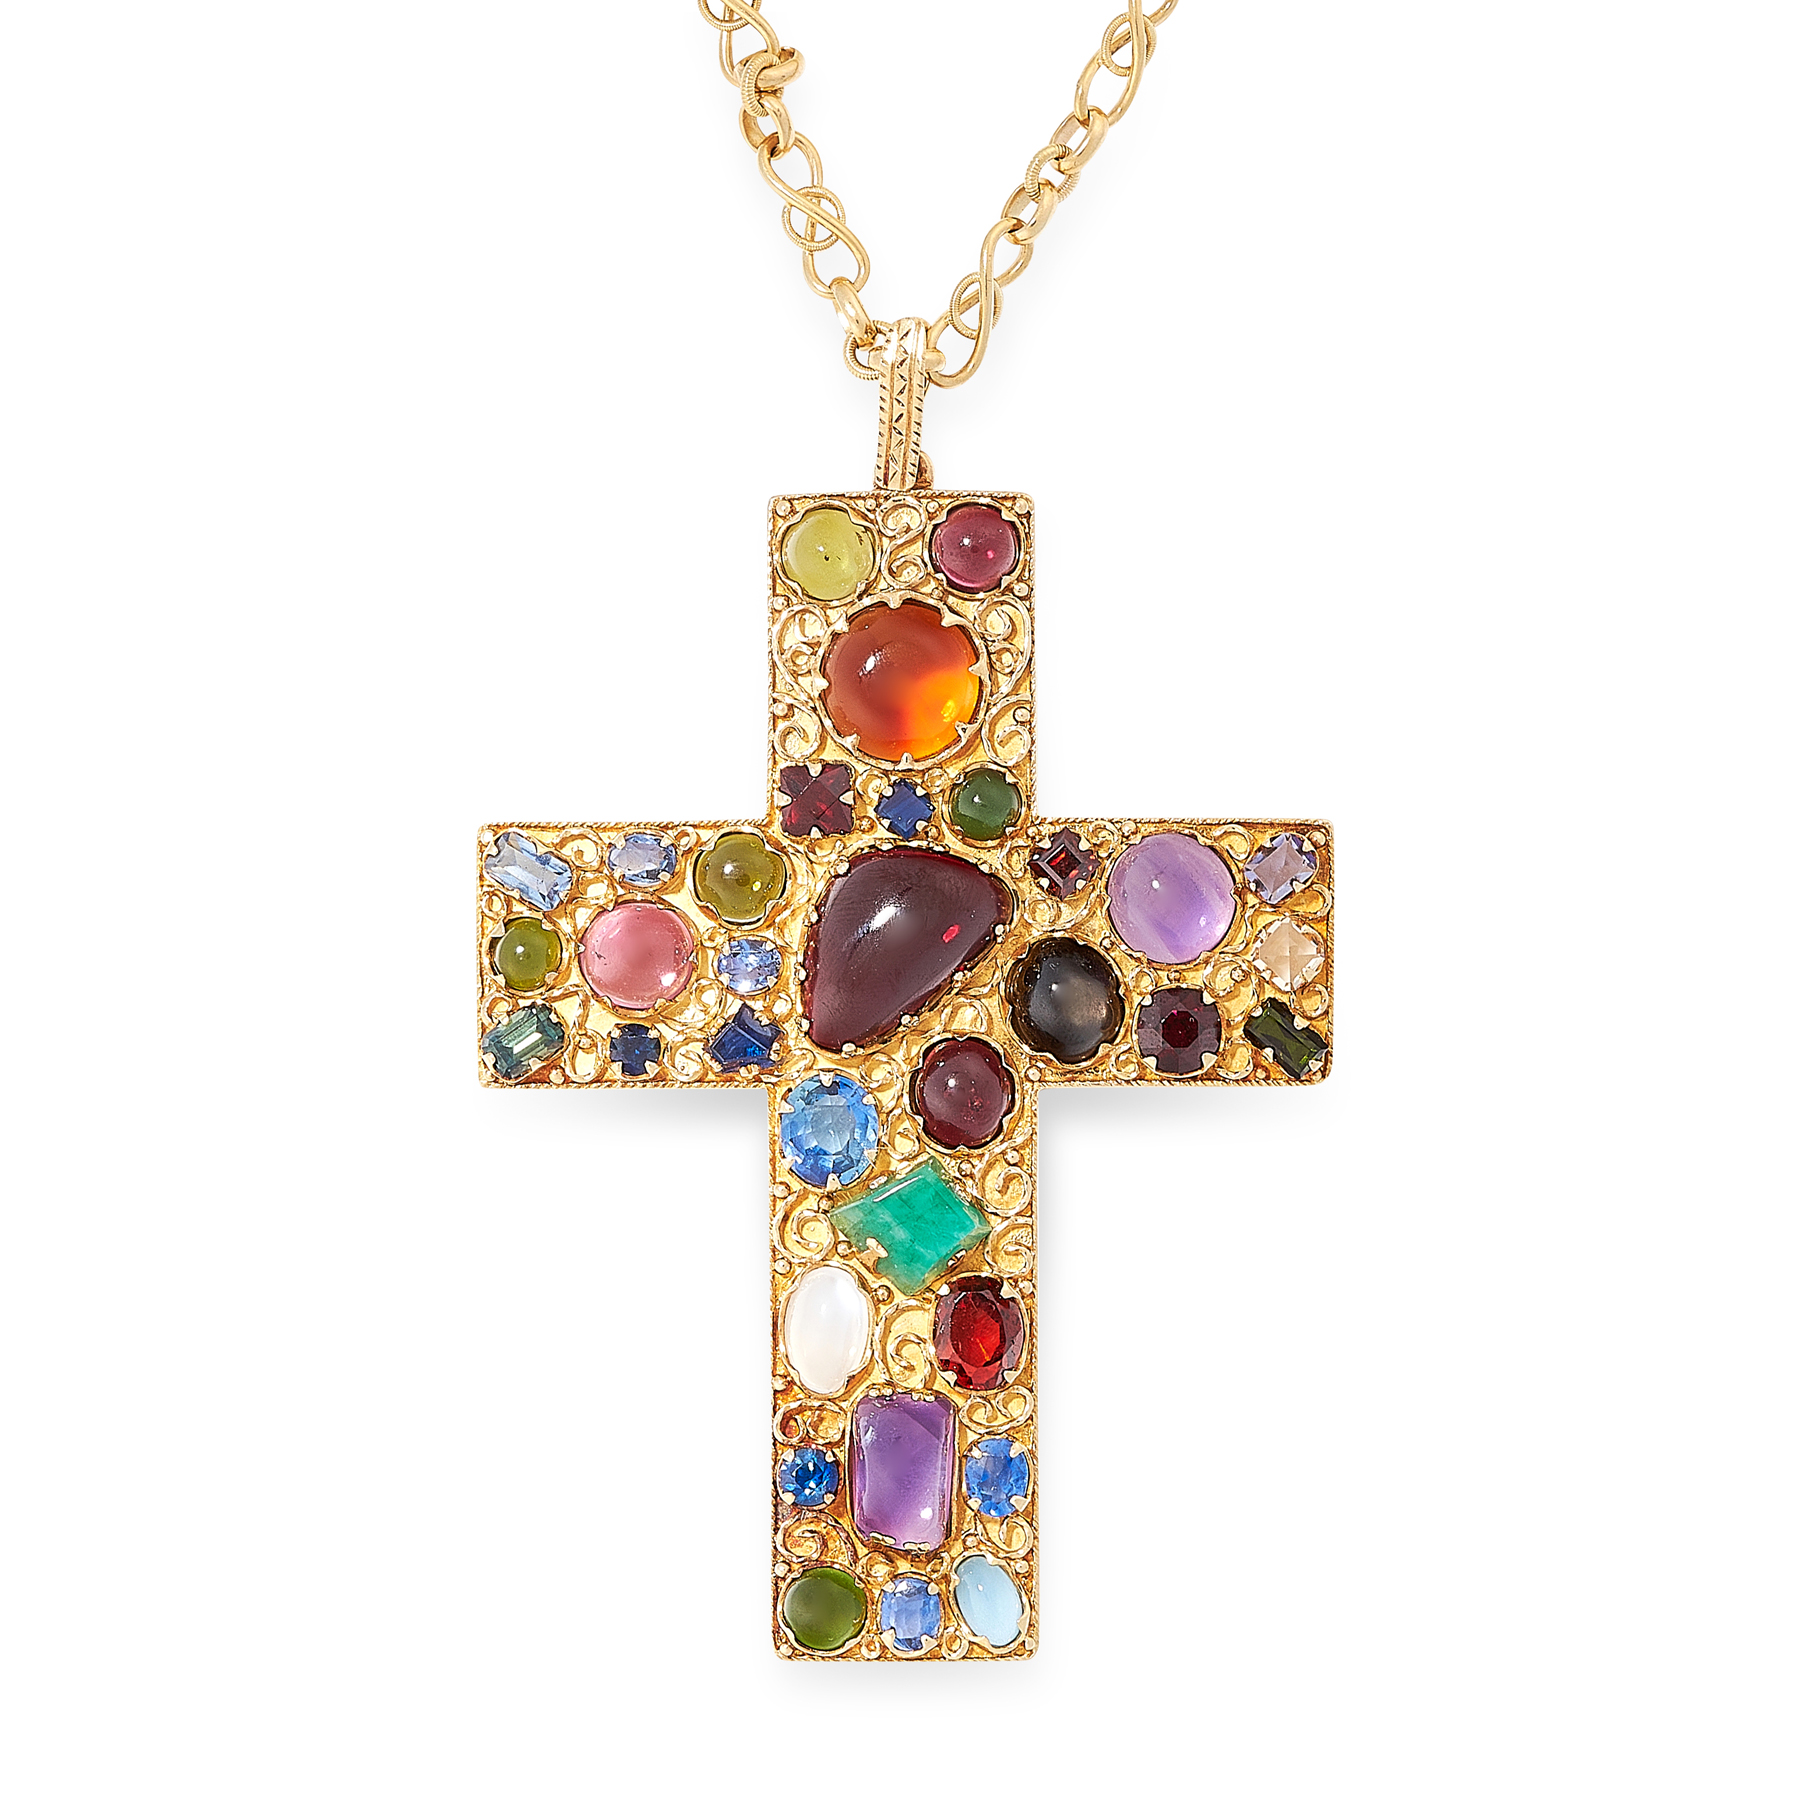 A JEWELLED CROSS PENDANT AND CHAIN in 18ct yellow gold, designed as a cross, jewelled allover with